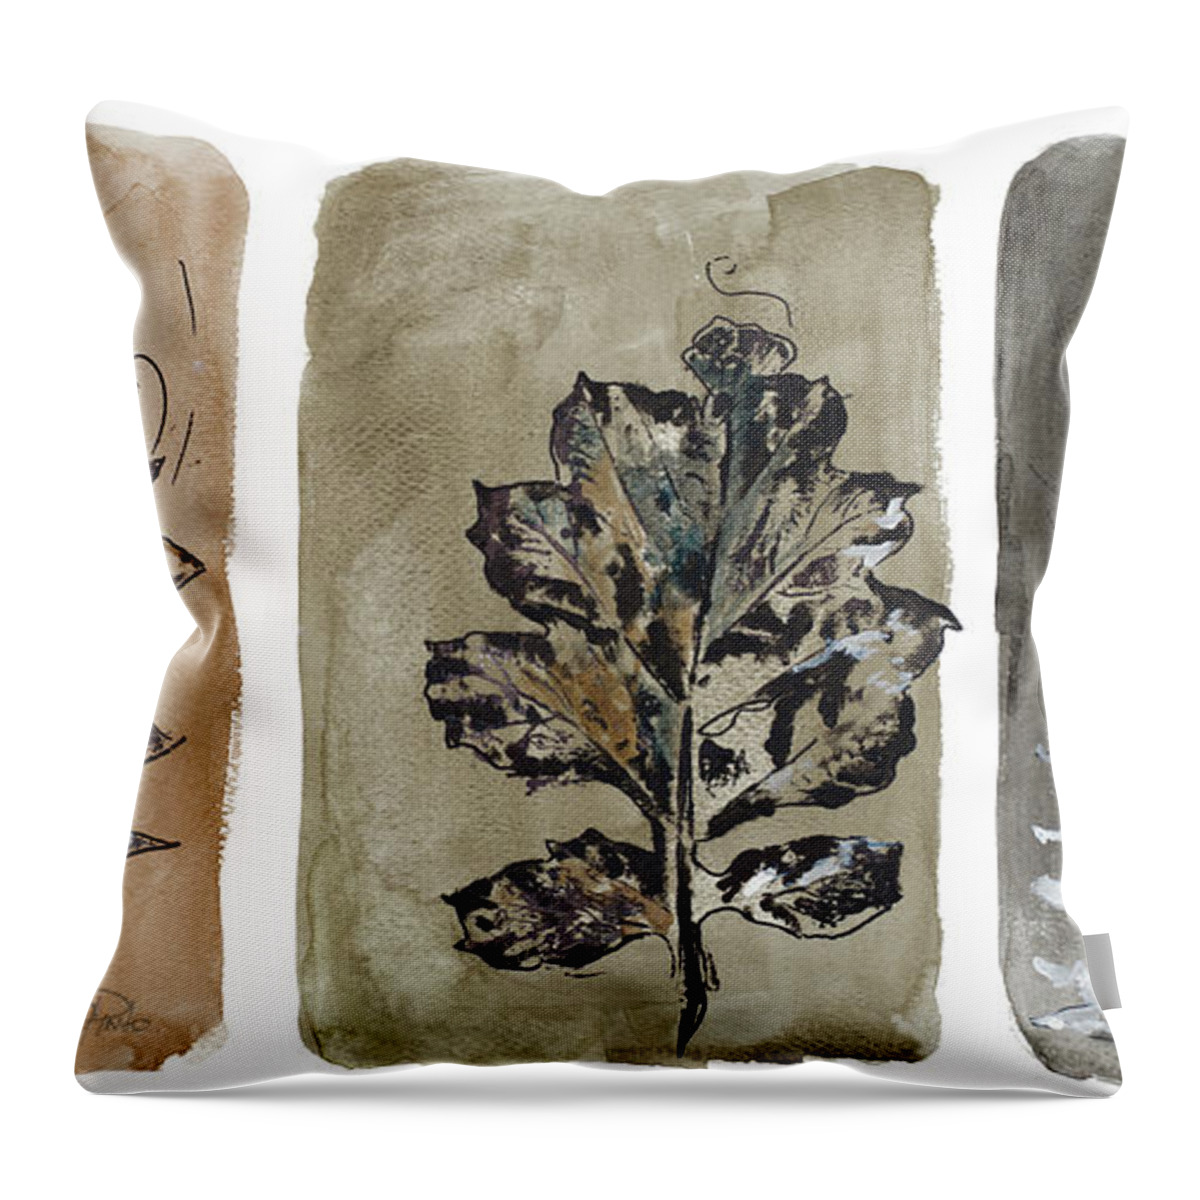 Watercolor Throw Pillow featuring the digital art Watercolor Sepia Leaves II by Patricia Pinto